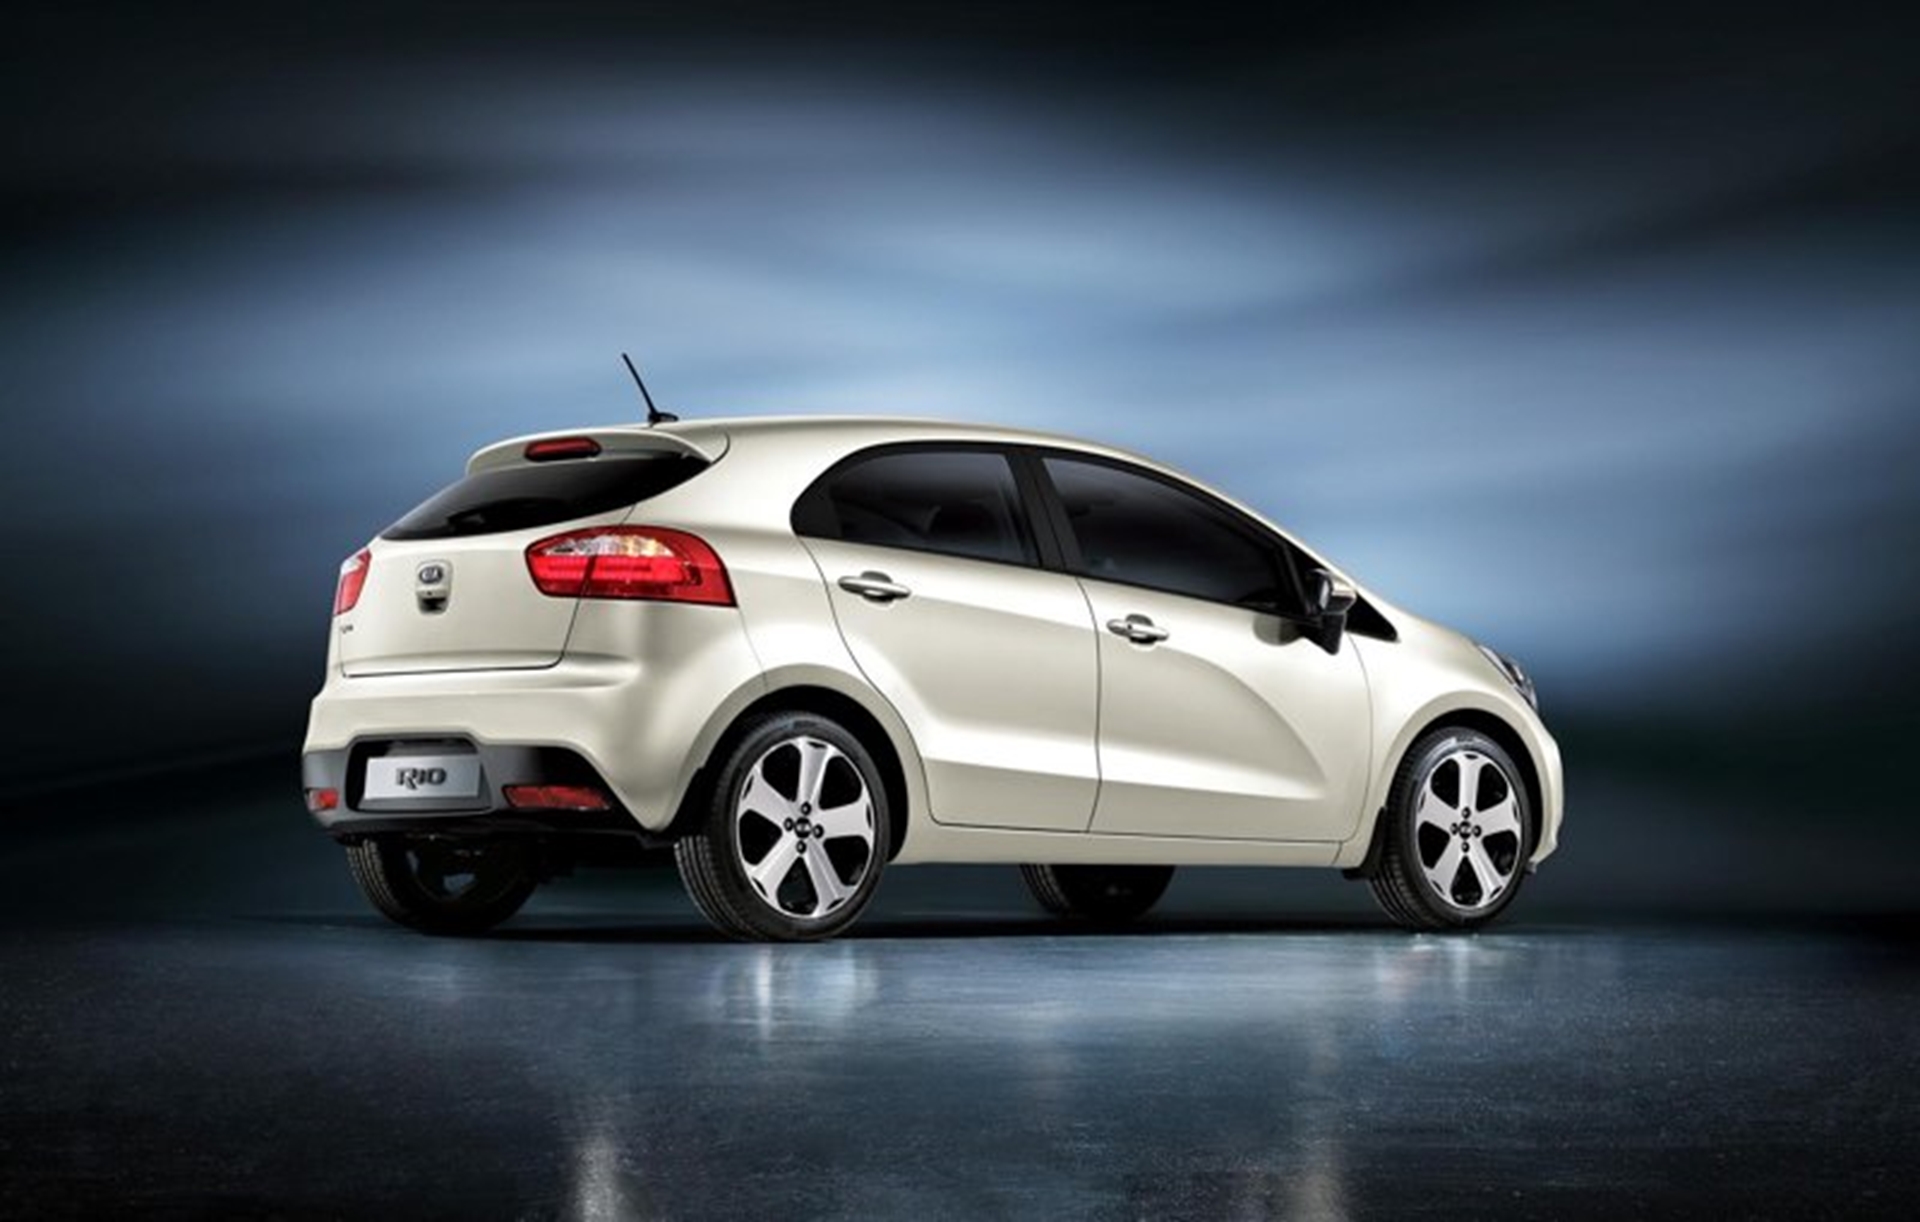 NEW KIA RIO 5-DOOR HATCHBACK TO BE UNVEILED AT THE 2011 JOHANNESBURG INTERNATIONAL MOTOR SHOW